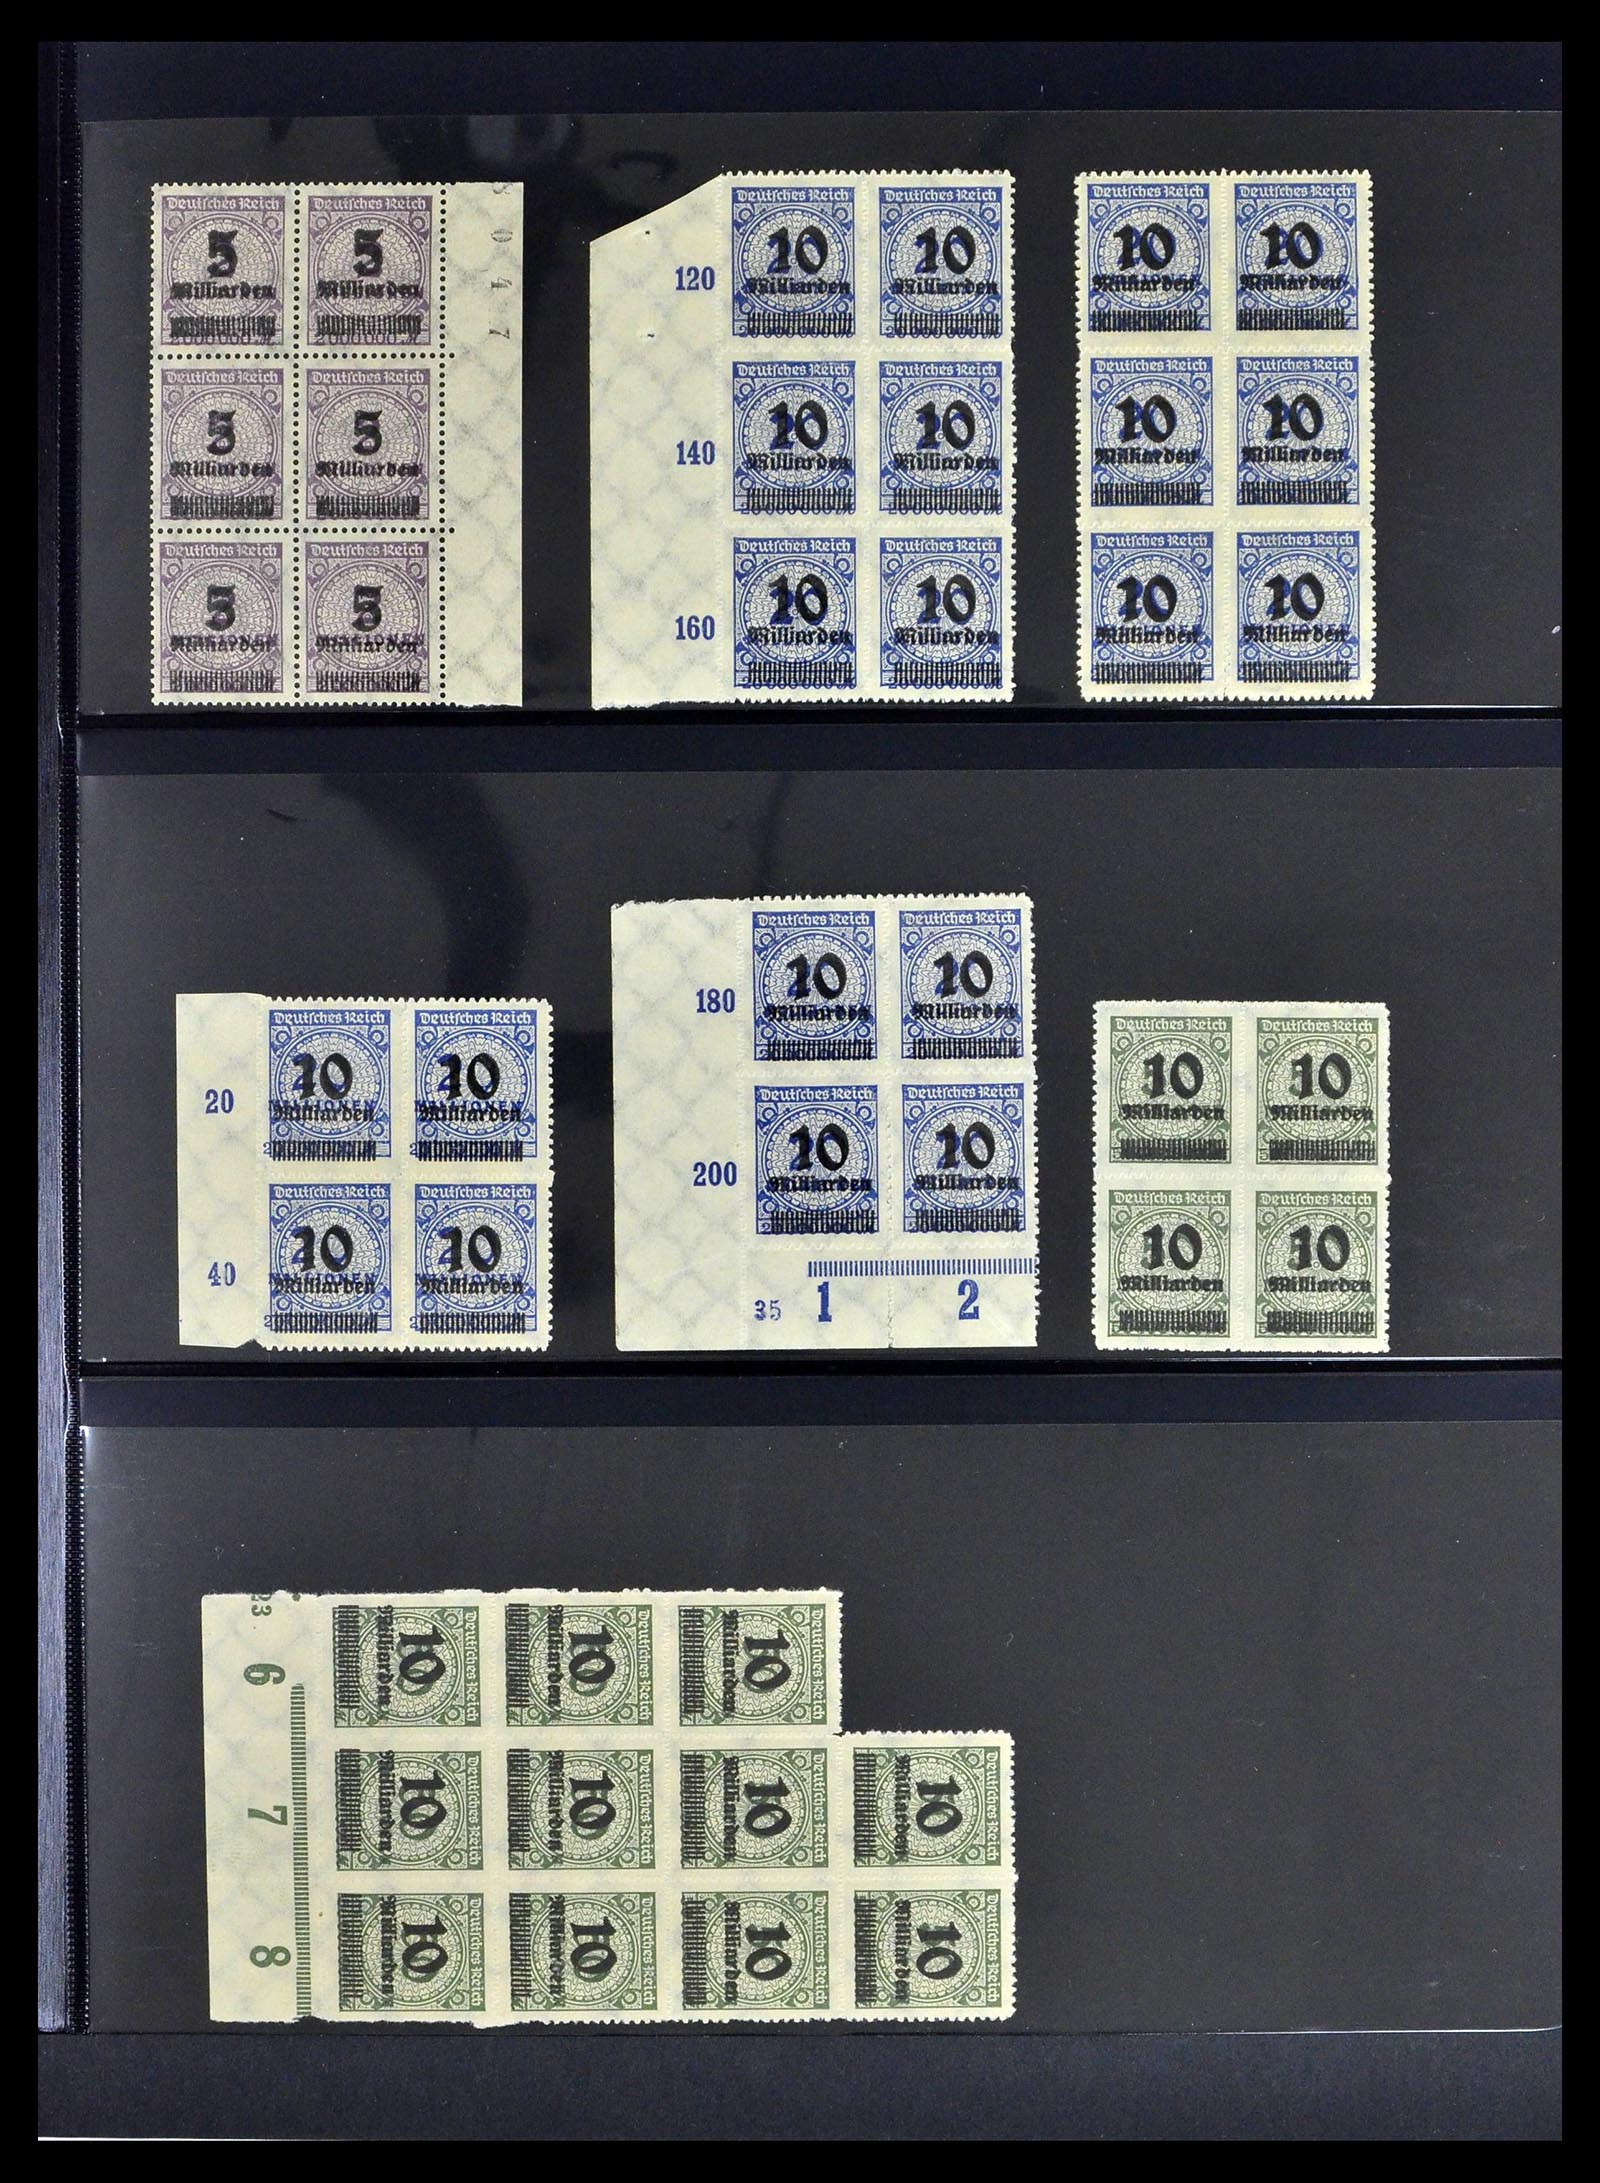 39255 0037 - Stamp collection 39255 German Reich MNH blocks of 4.